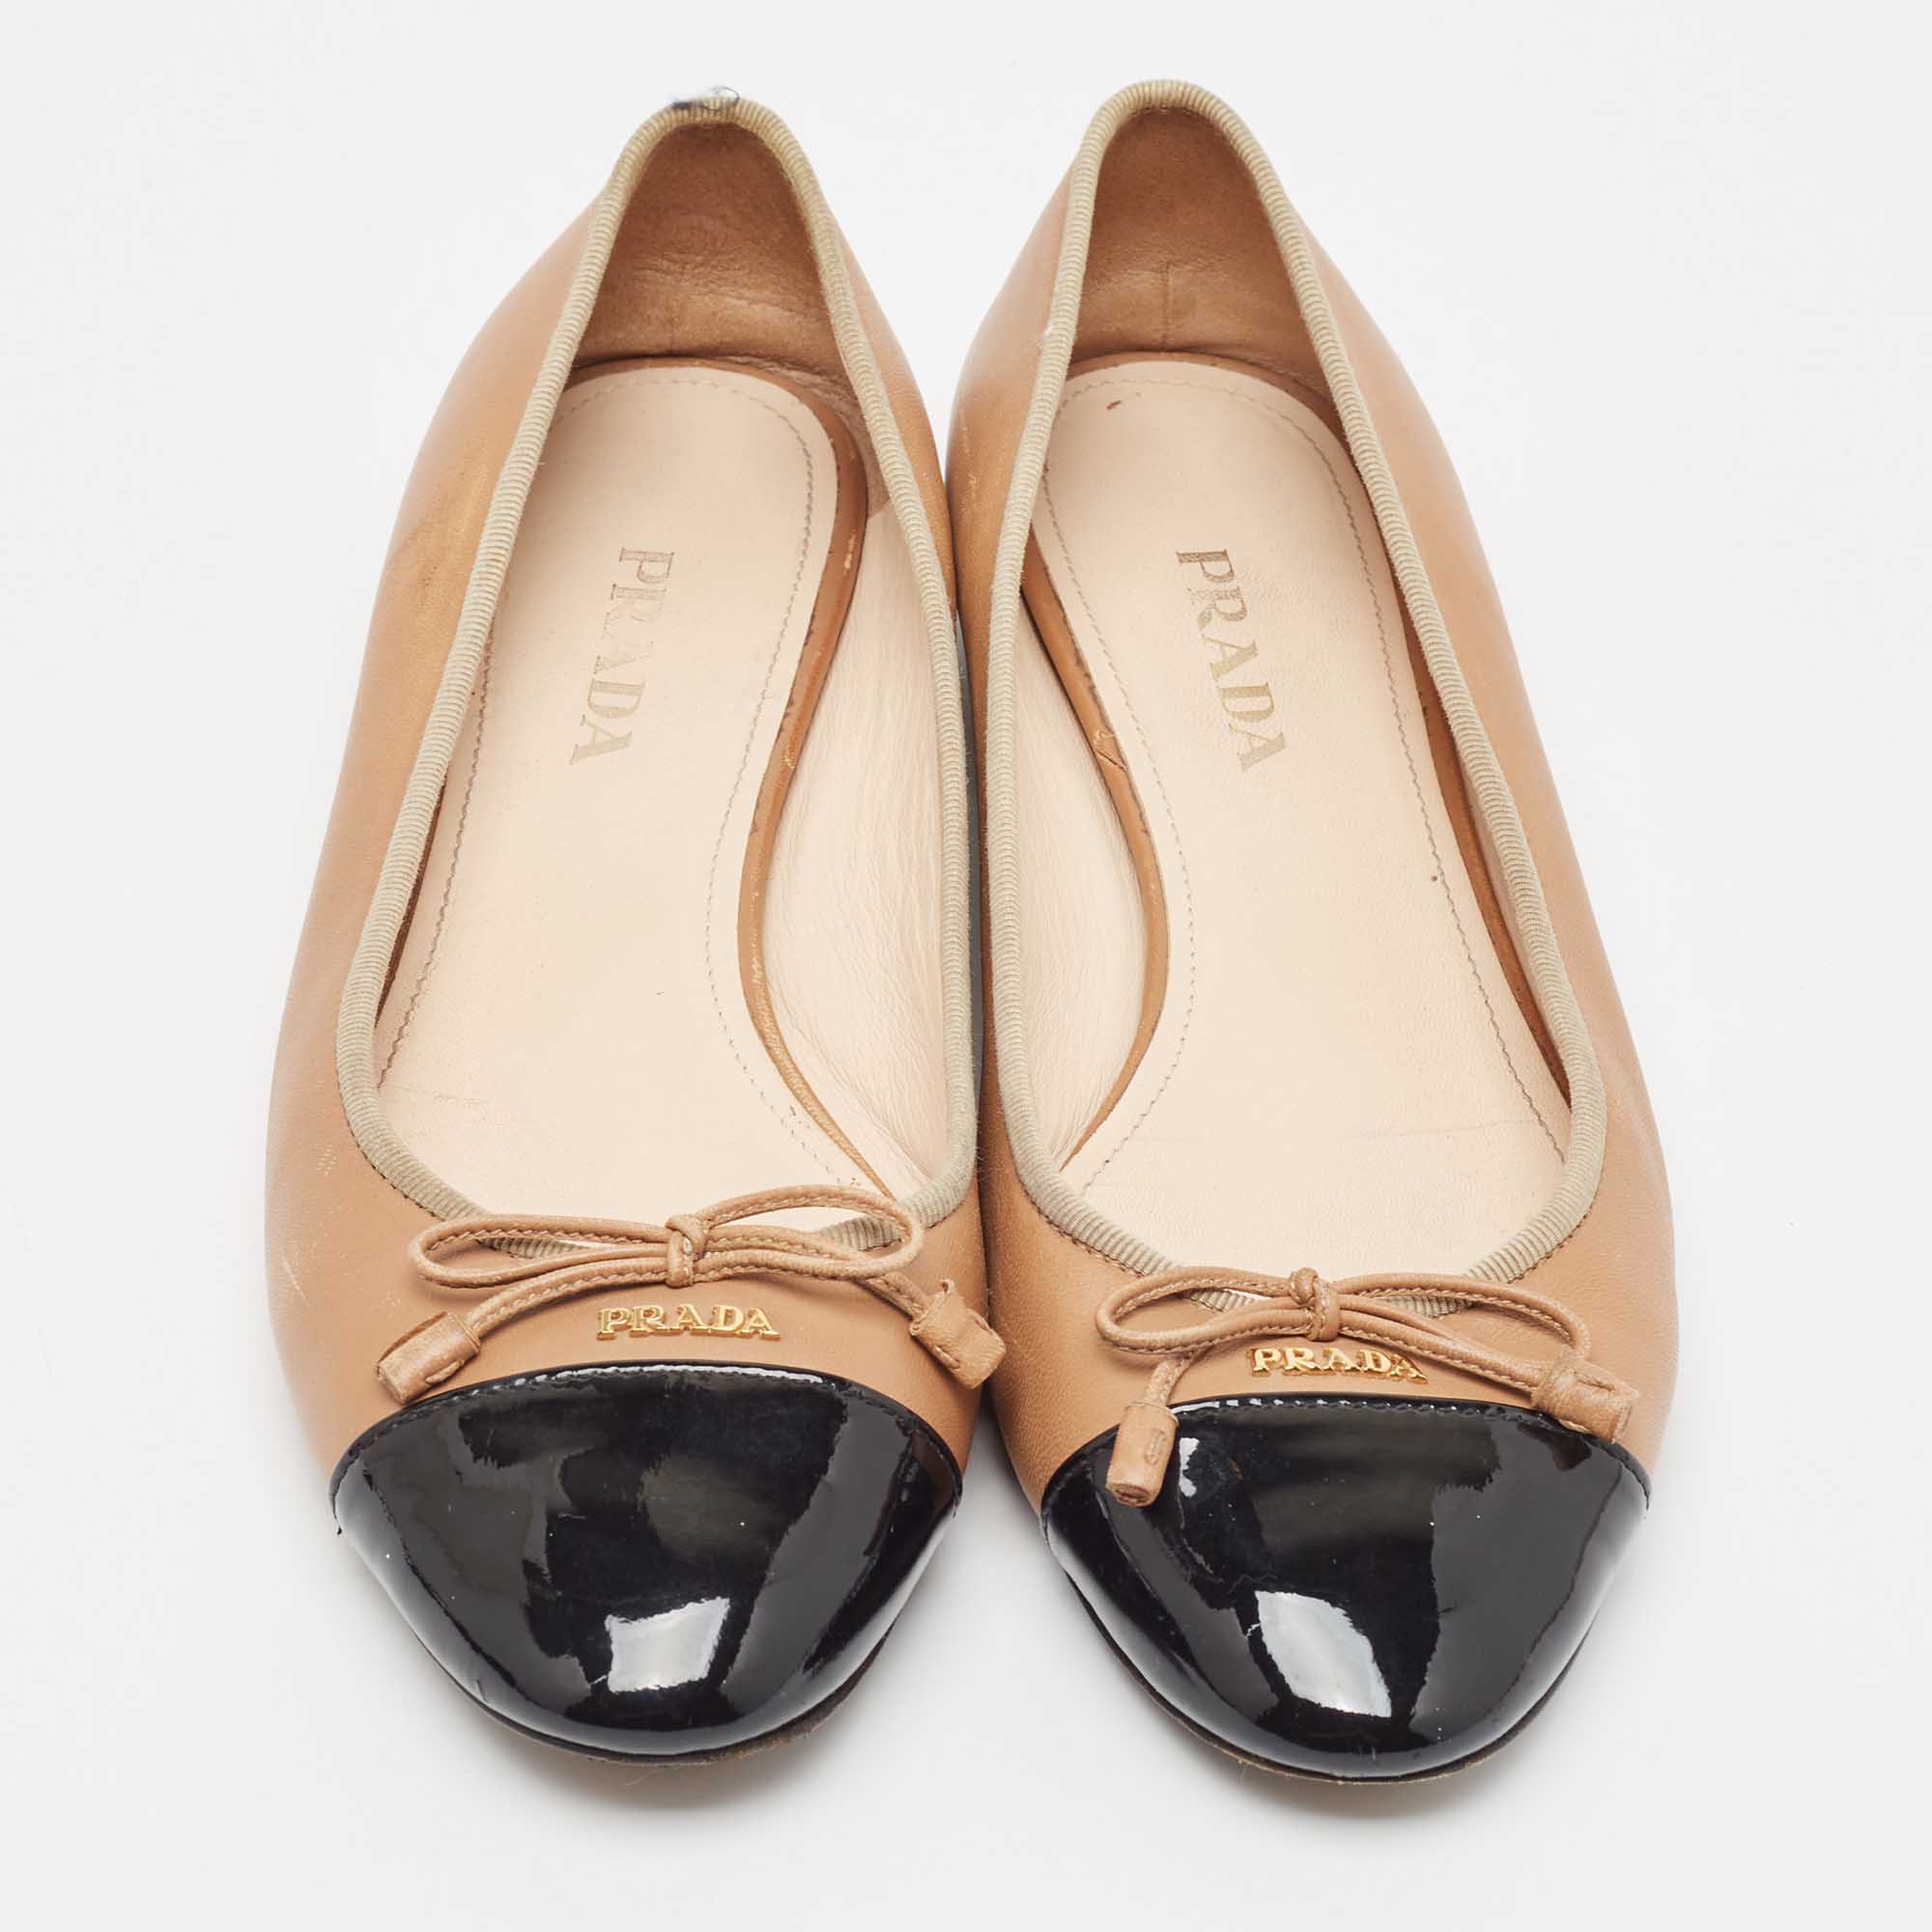 Prada Brown Leather Bow Ballet Flats Size 40